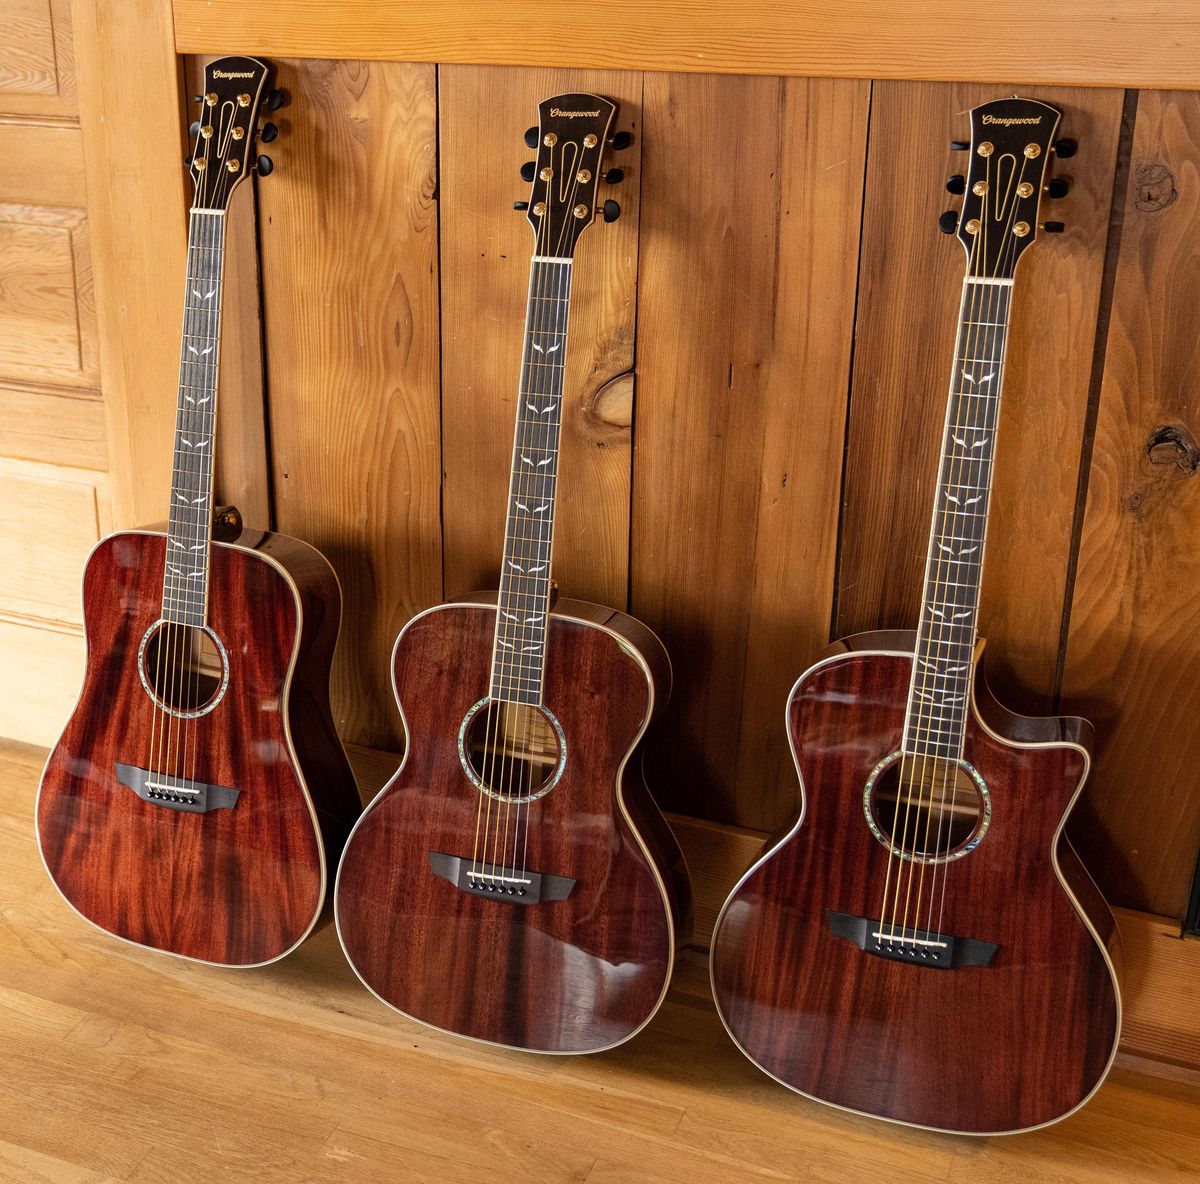 Orangewood Introduces the Melrose Mahogany Collection